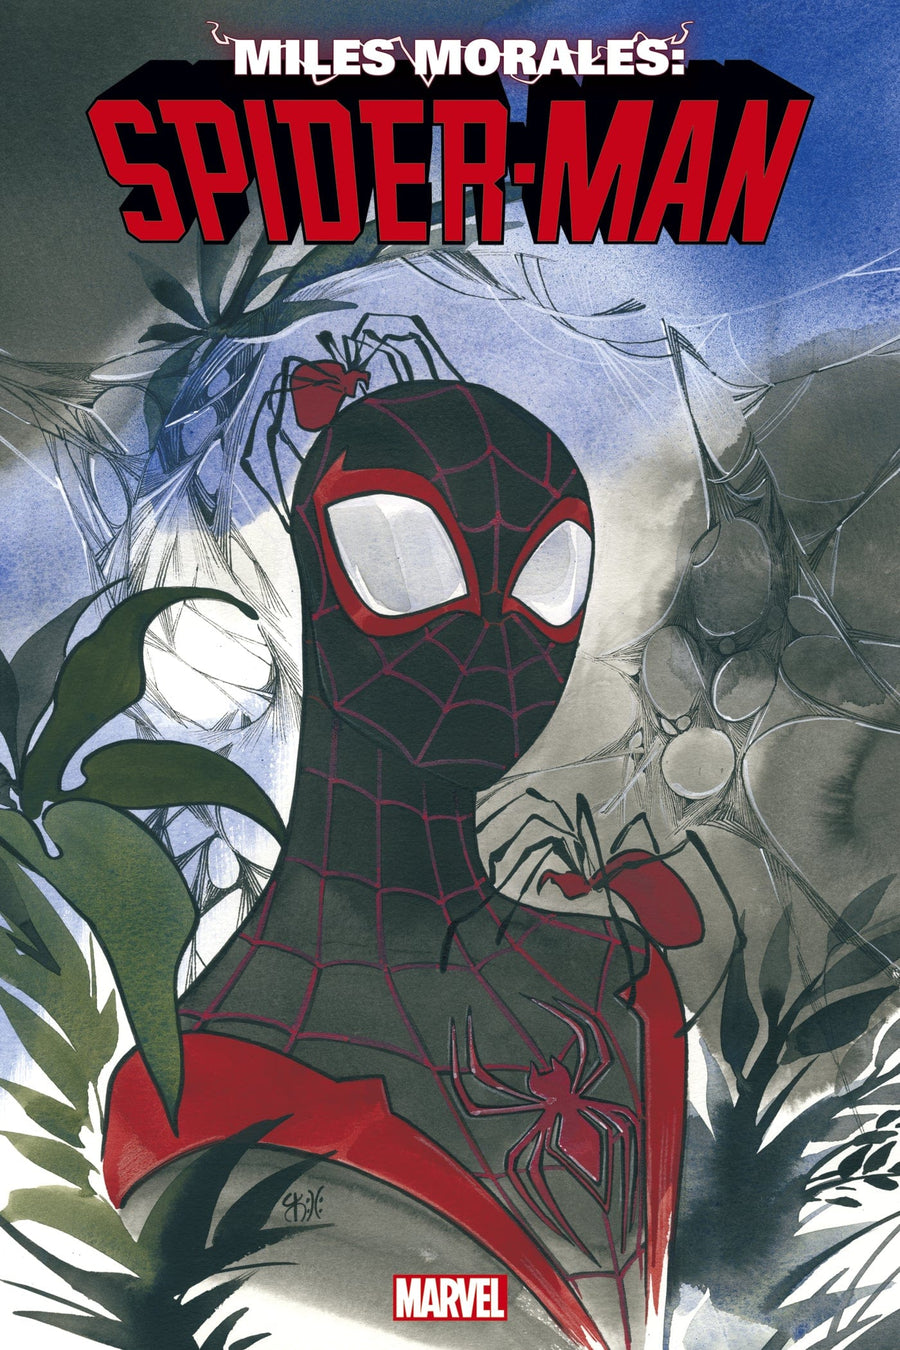 Spider-Man Vol. 1: End of the Spider-Verse (B&N Exclusive Edition)|BN  Exclusive